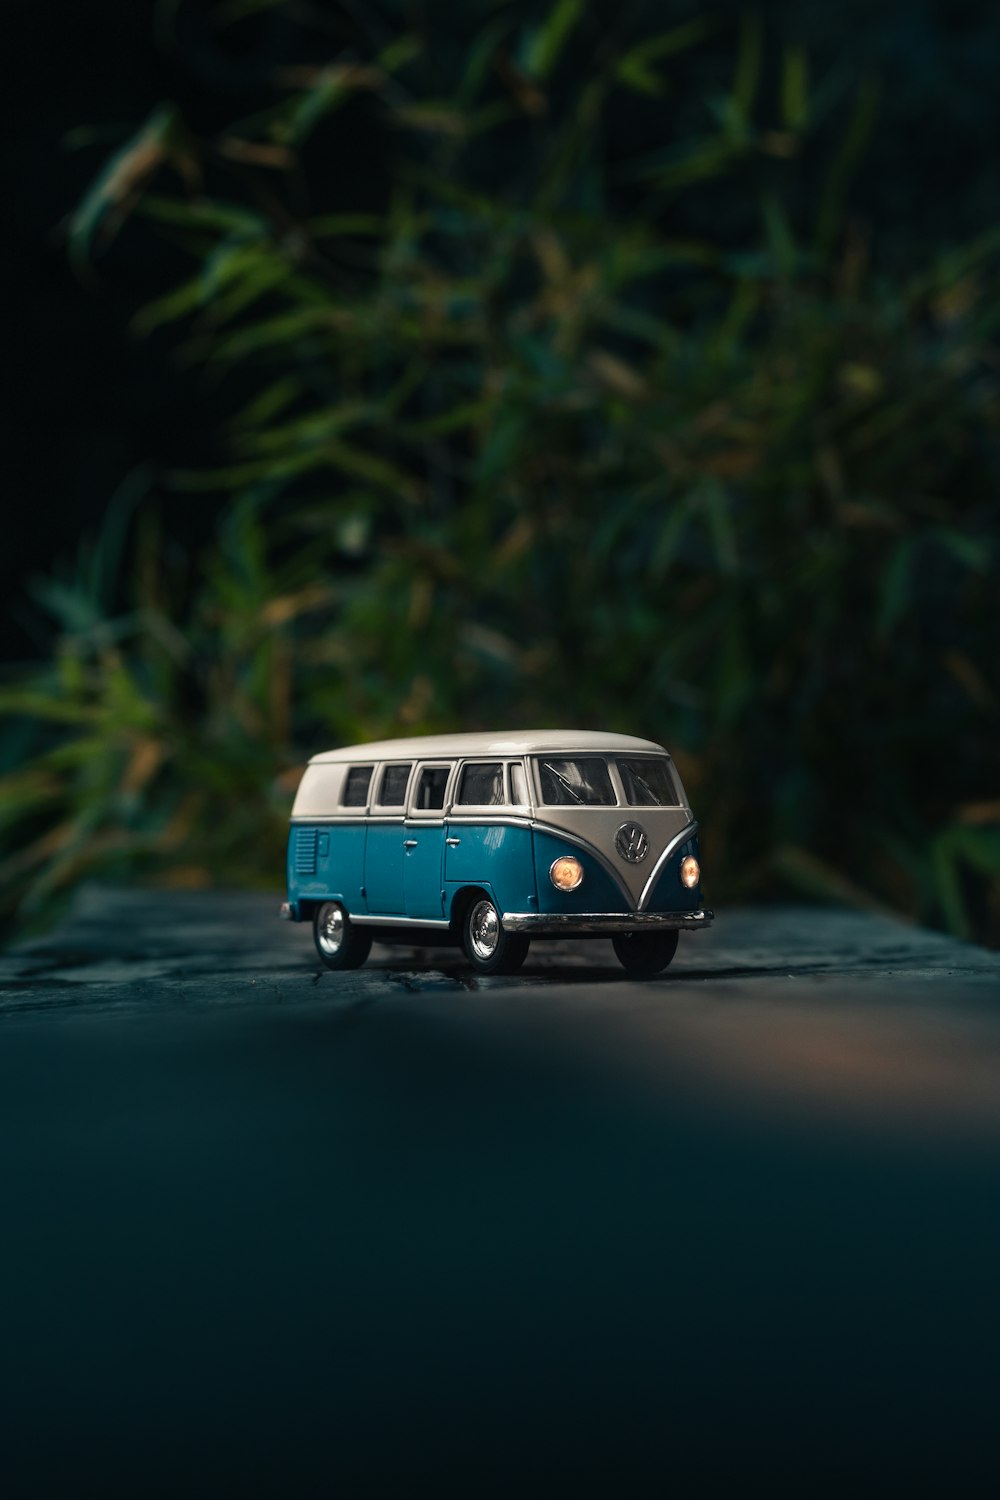 white and blue Volkswagen T1 van toy on gray surface